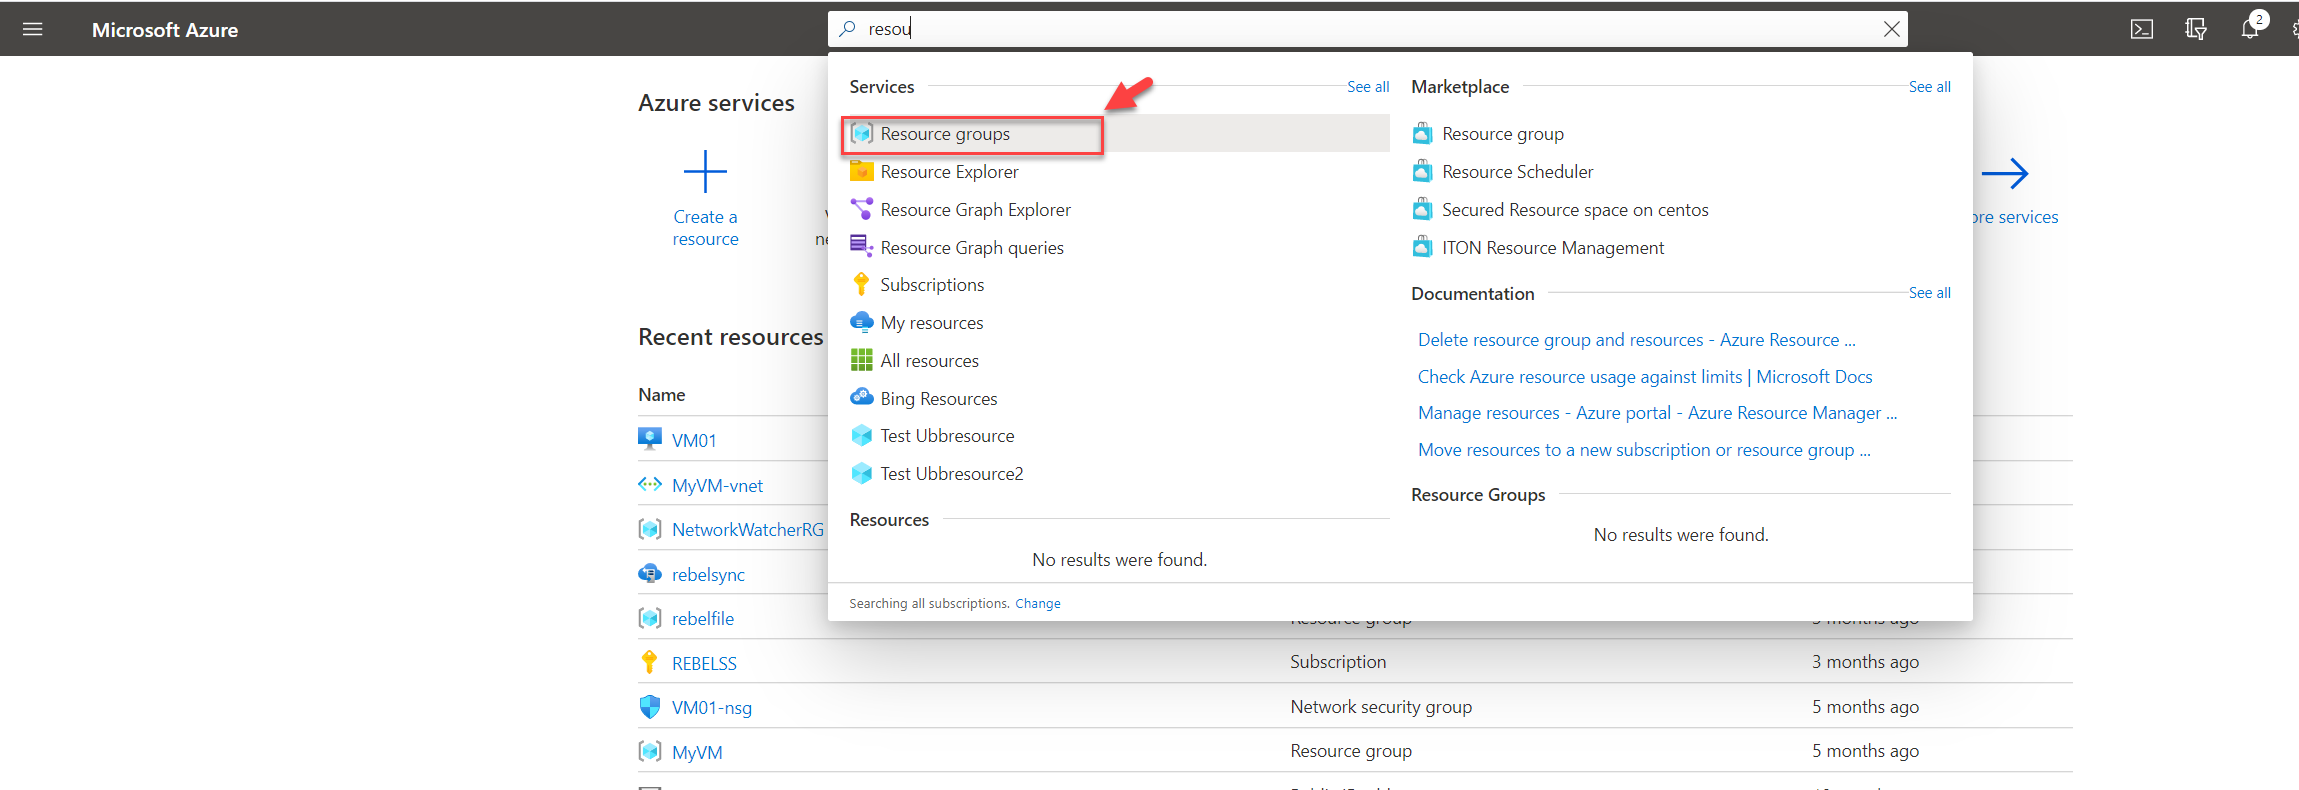 Search for Azure Resource Groups